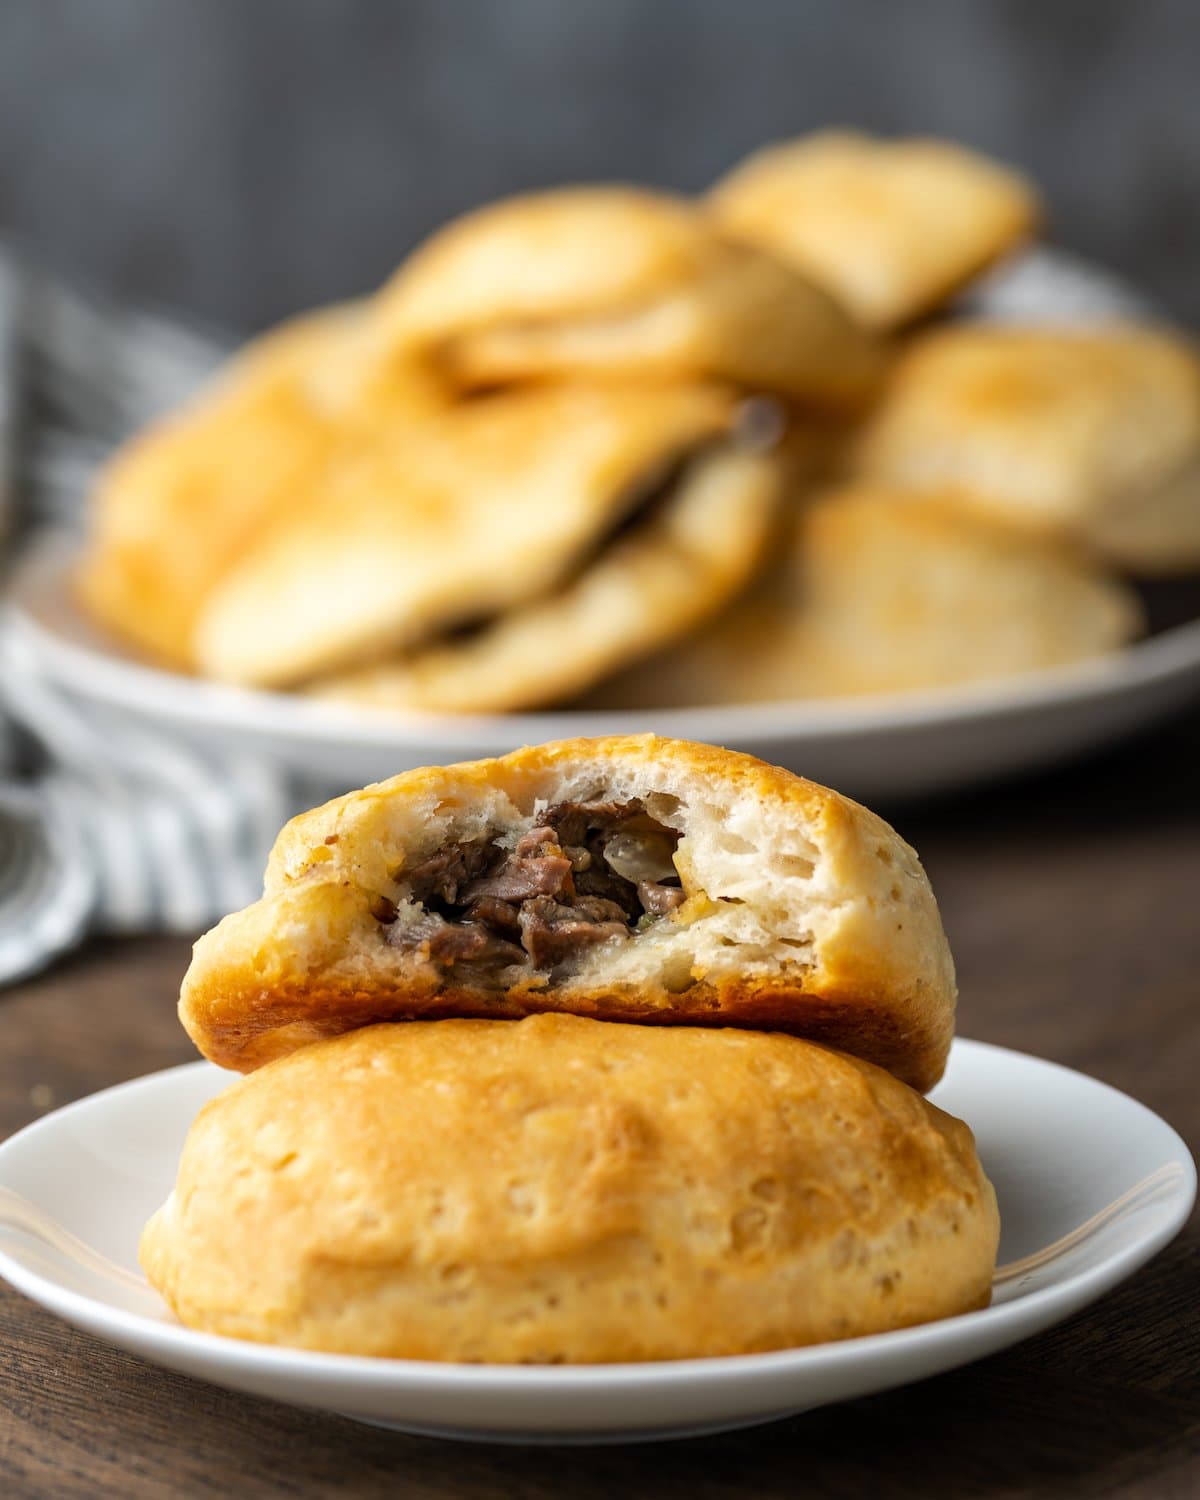 Two Philly cheesesteak stuffed biscuits on a plate, one with a bite missing, with more biscuits in the background.